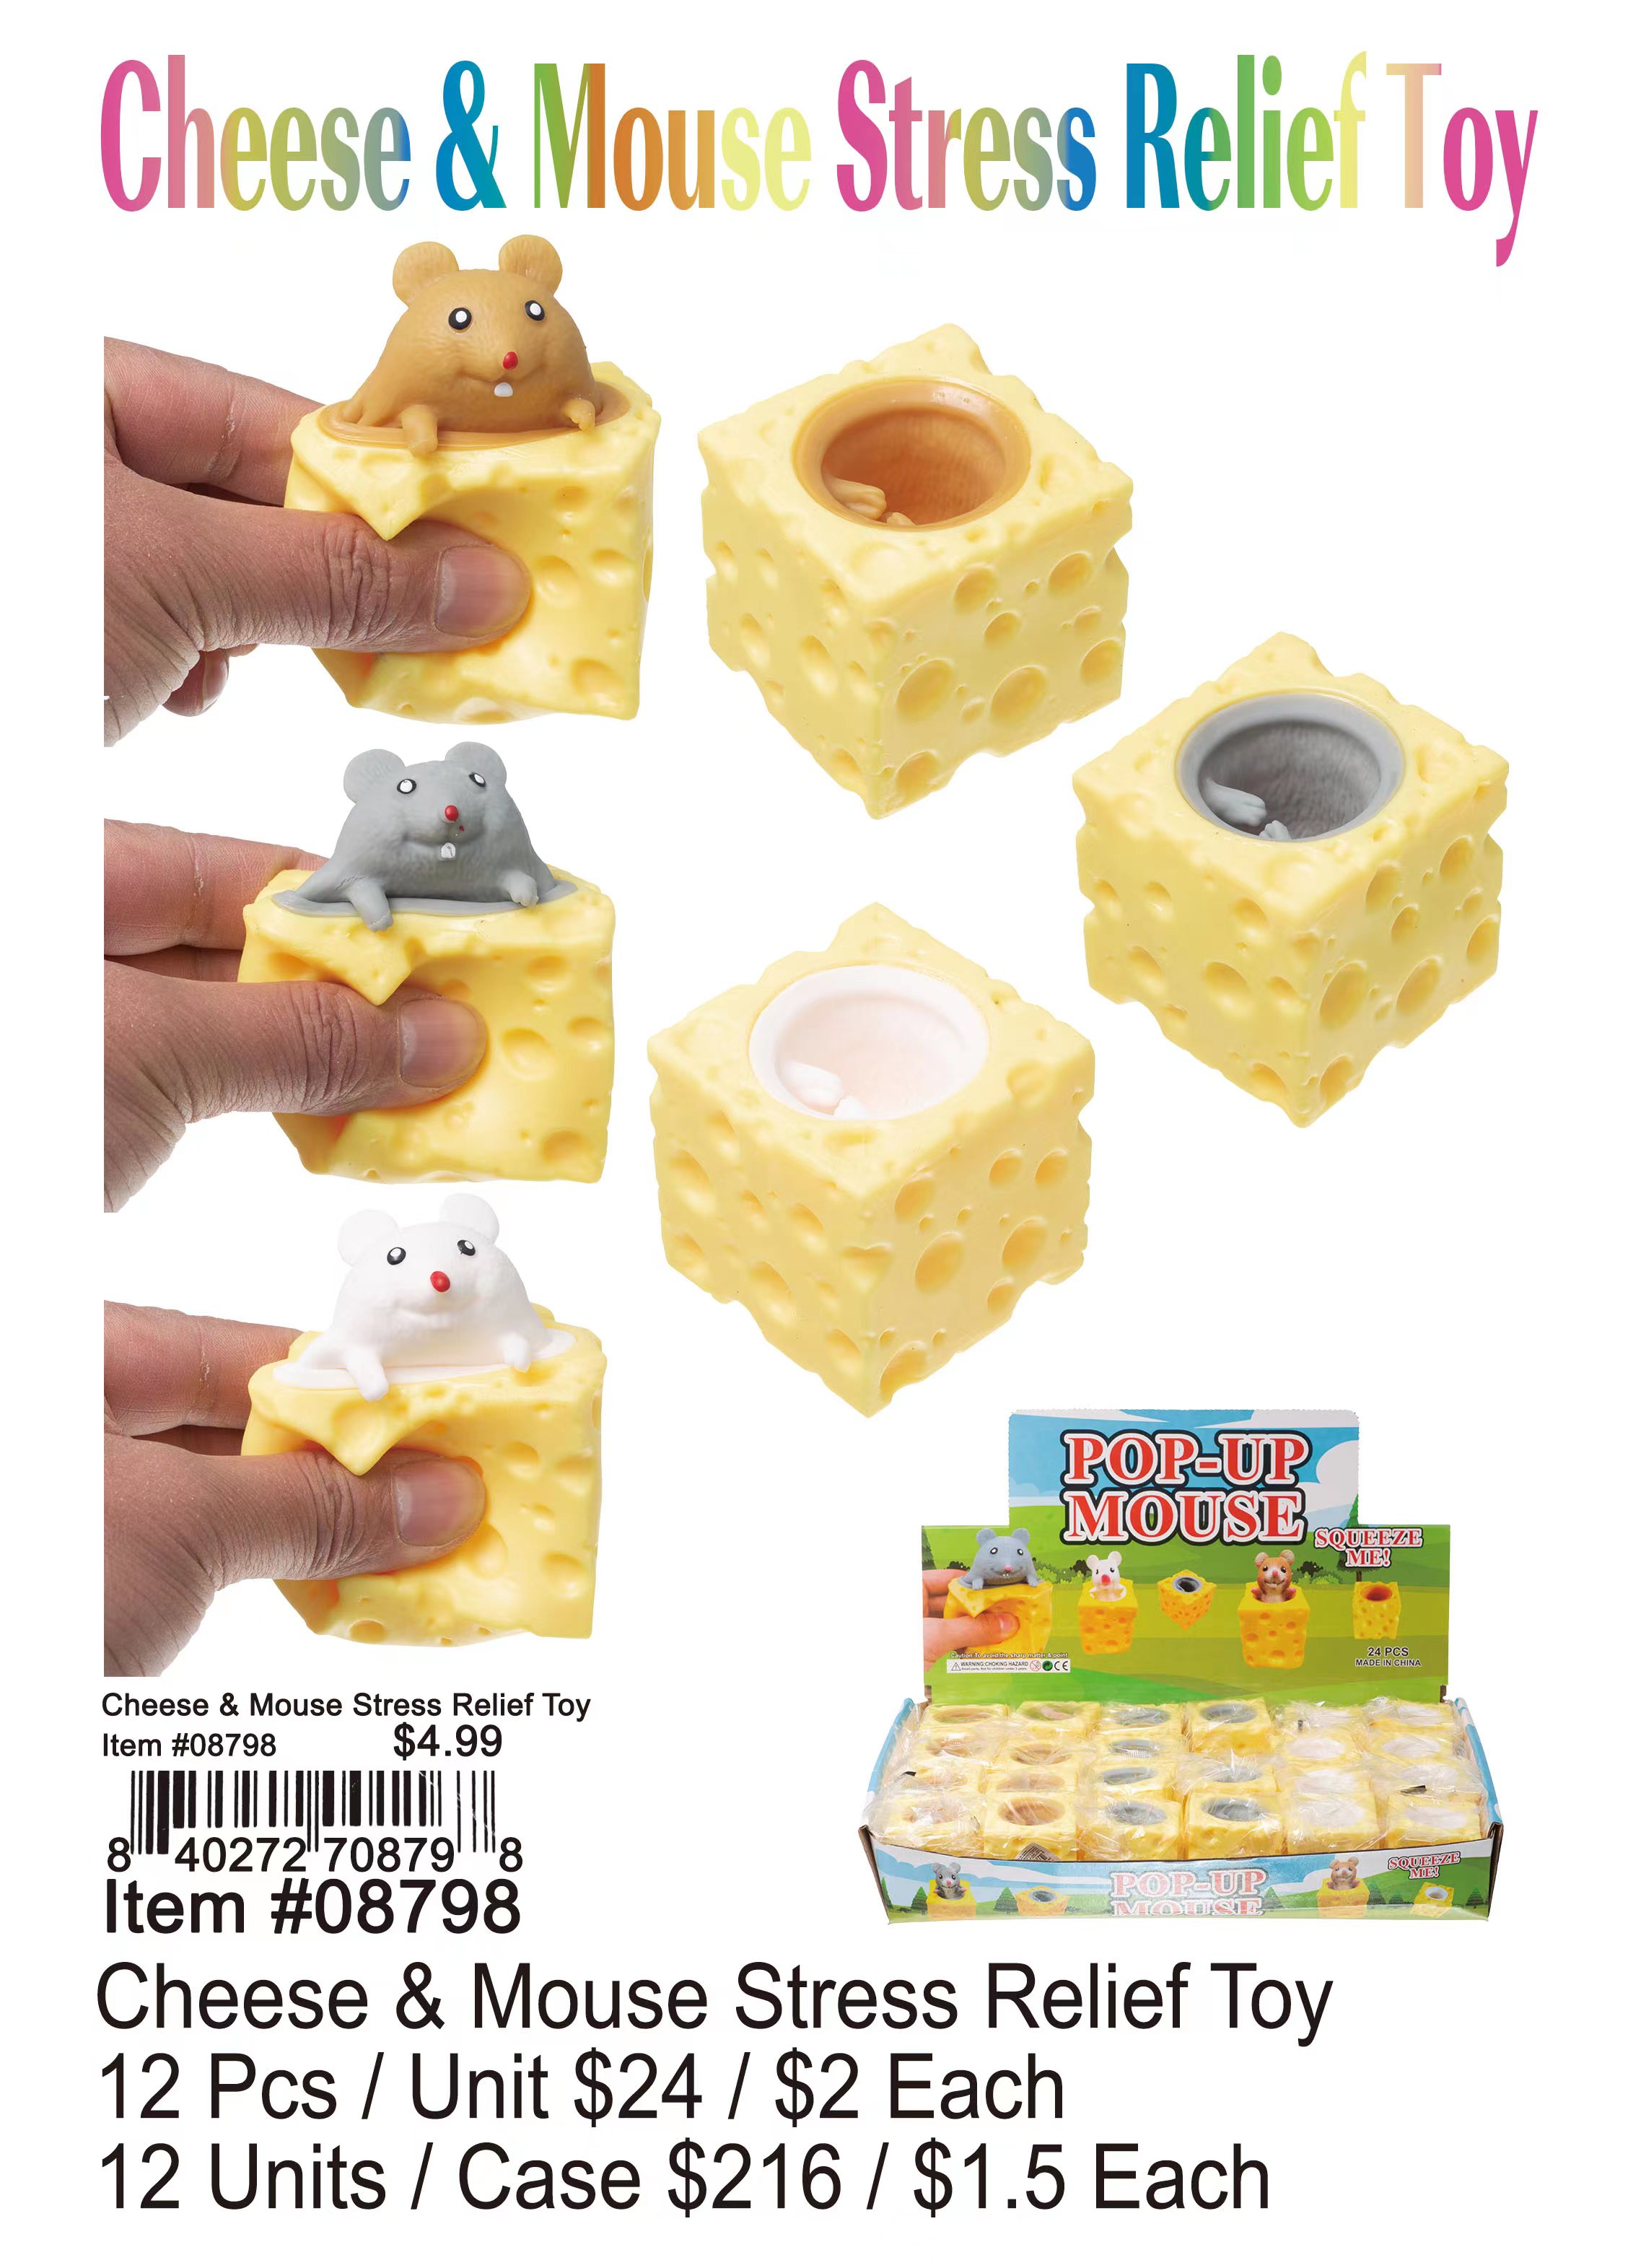 Cheese and Mouse Stress Relief Toy